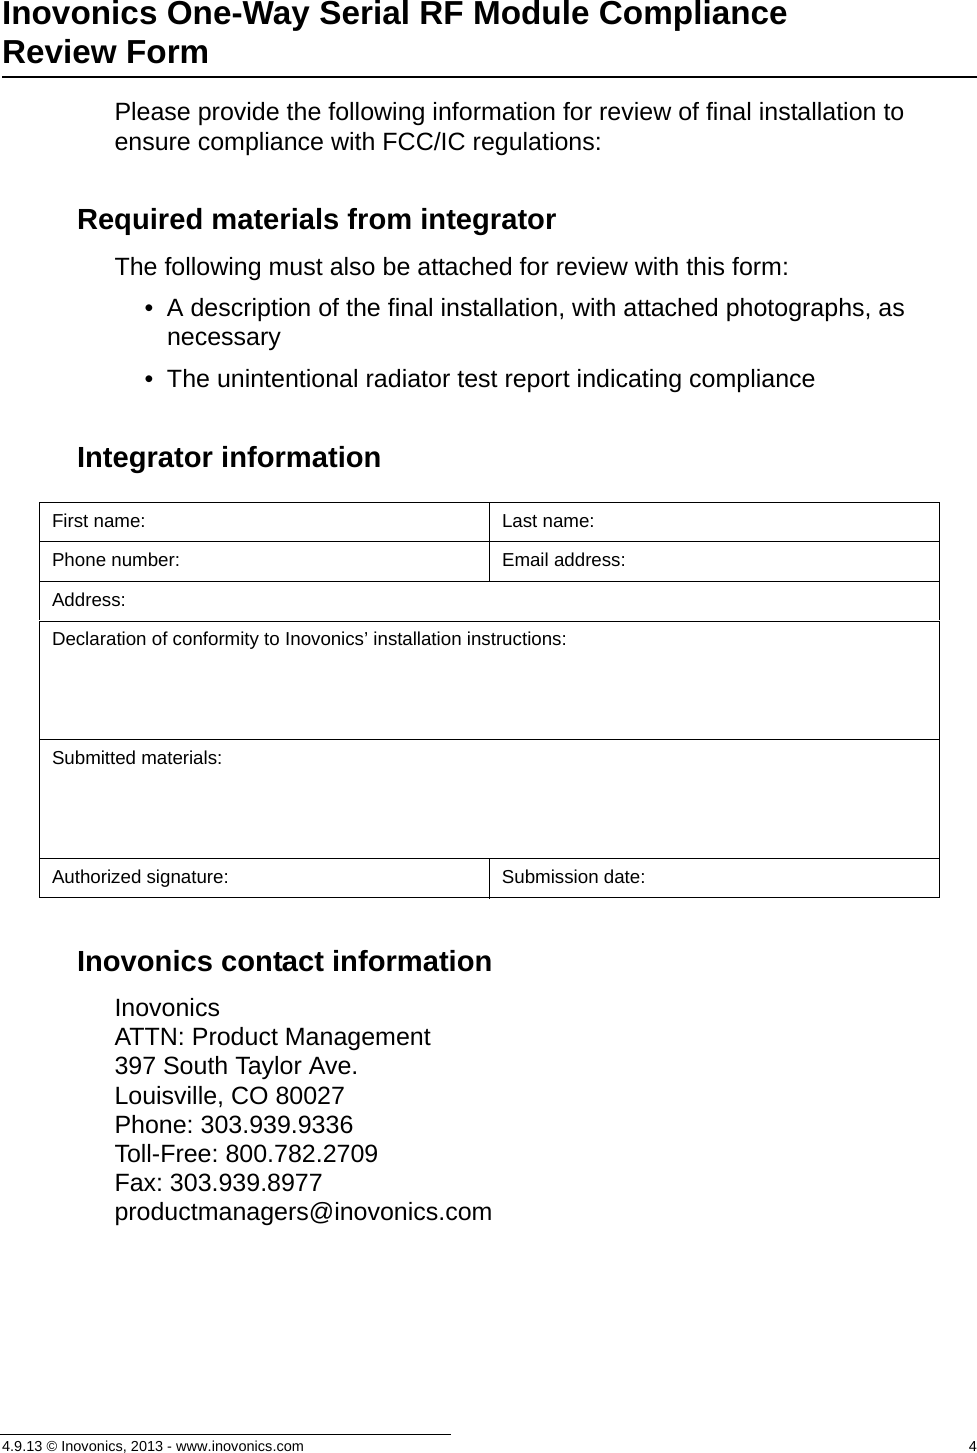 4.9.13 © Inovonics, 2013 - www.inovonics.com  4Inovonics One-Way Serial RF Module Compliance Review FormPlease provide the following information for review of final installation to ensure compliance with FCC/IC regulations:Required materials from integratorThe following must also be attached for review with this form:• A description of the final installation, with attached photographs, as necessary• The unintentional radiator test report indicating complianceIntegrator informationInovonics contact informationInovonics ATTN: Product Management397 South Taylor Ave.Louisville, CO 80027Phone: 303.939.9336Toll-Free: 800.782.2709Fax: 303.939.8977productmanagers@inovonics.comFirst name: Last name:Phone number: Email address:Address:Declaration of conformity to Inovonics’ installation instructions:Submitted materials:Authorized signature: Submission date: